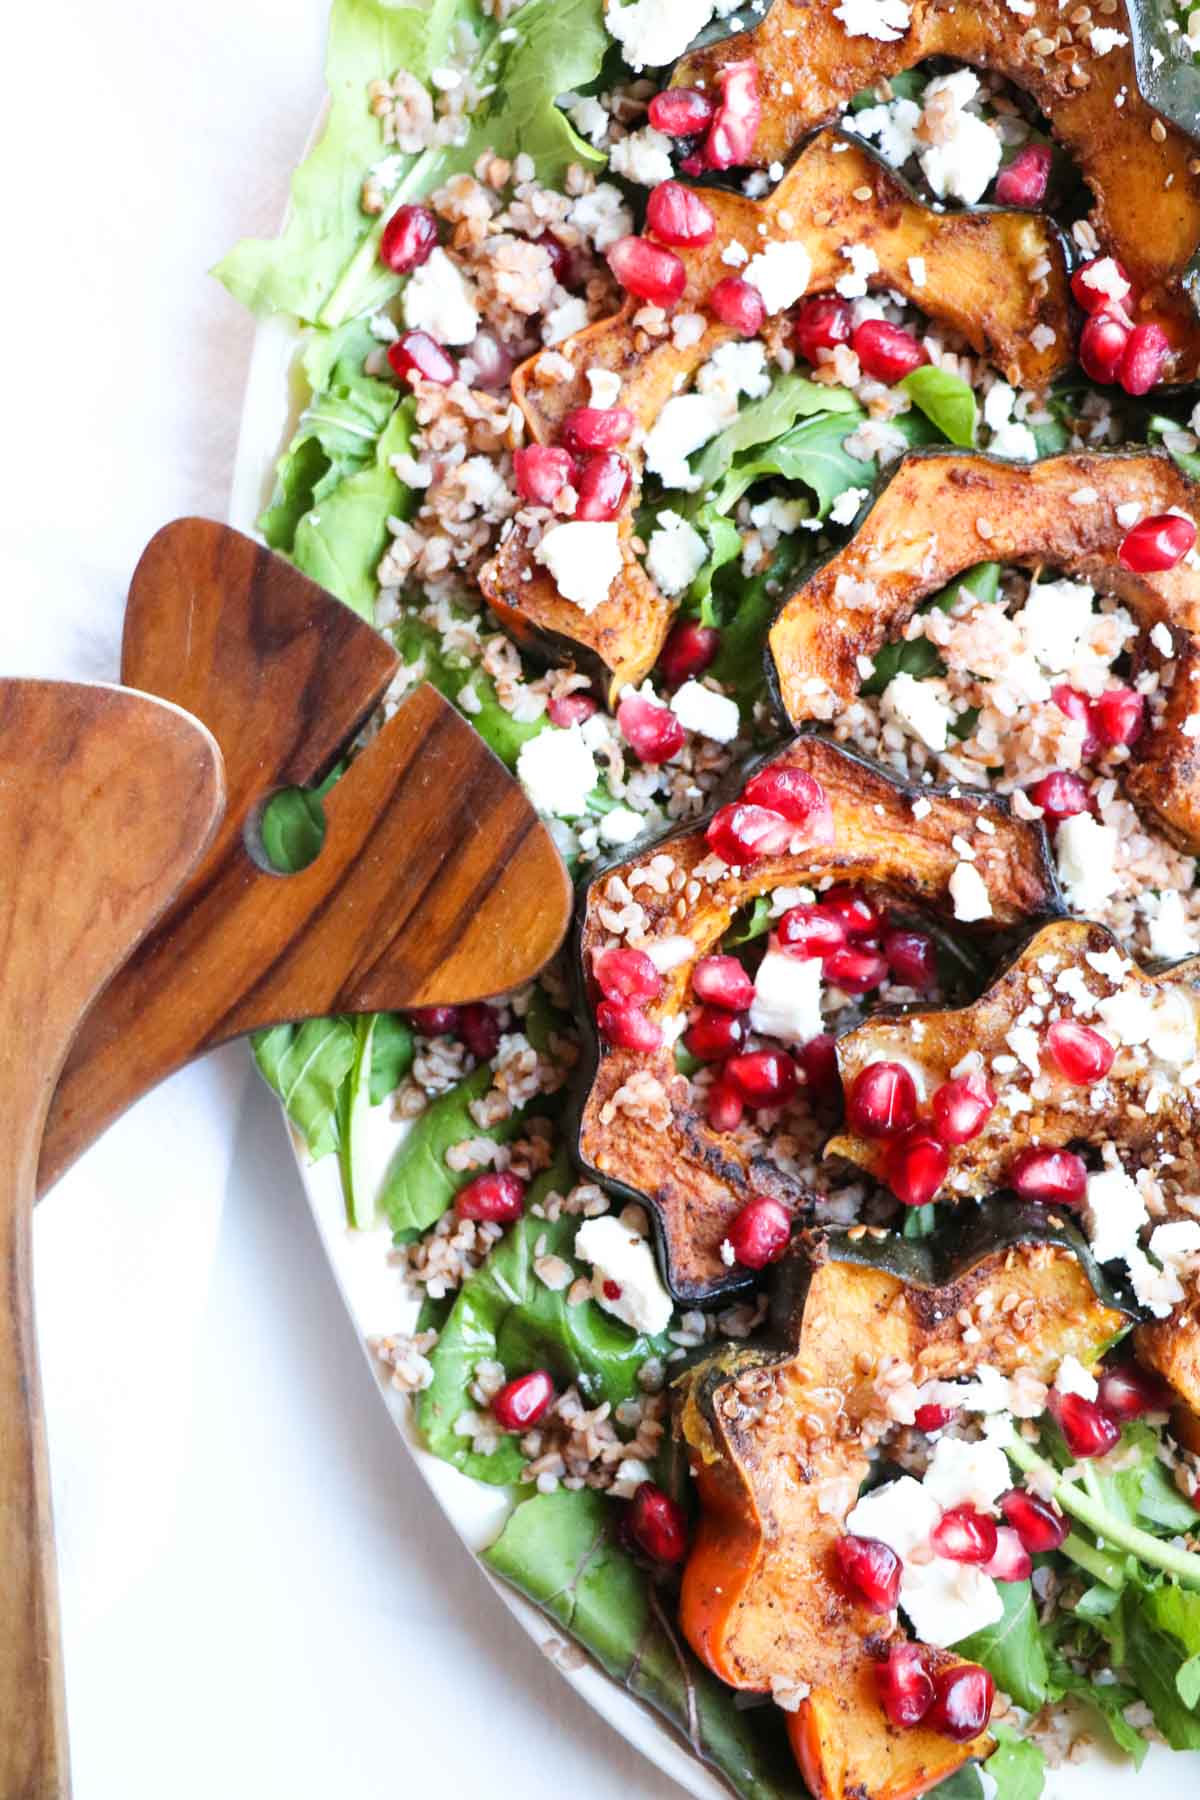 This festive (gluten free) Roasted Acorn Squash Salad with warm Buckwheat, Five-Spice Acorn Squash, Feta Cheese, and Pomegranate Seeds is full of healthy seasonal ingredients and a sweet and tangy maple dijon dressing. |Abraskitchen.com